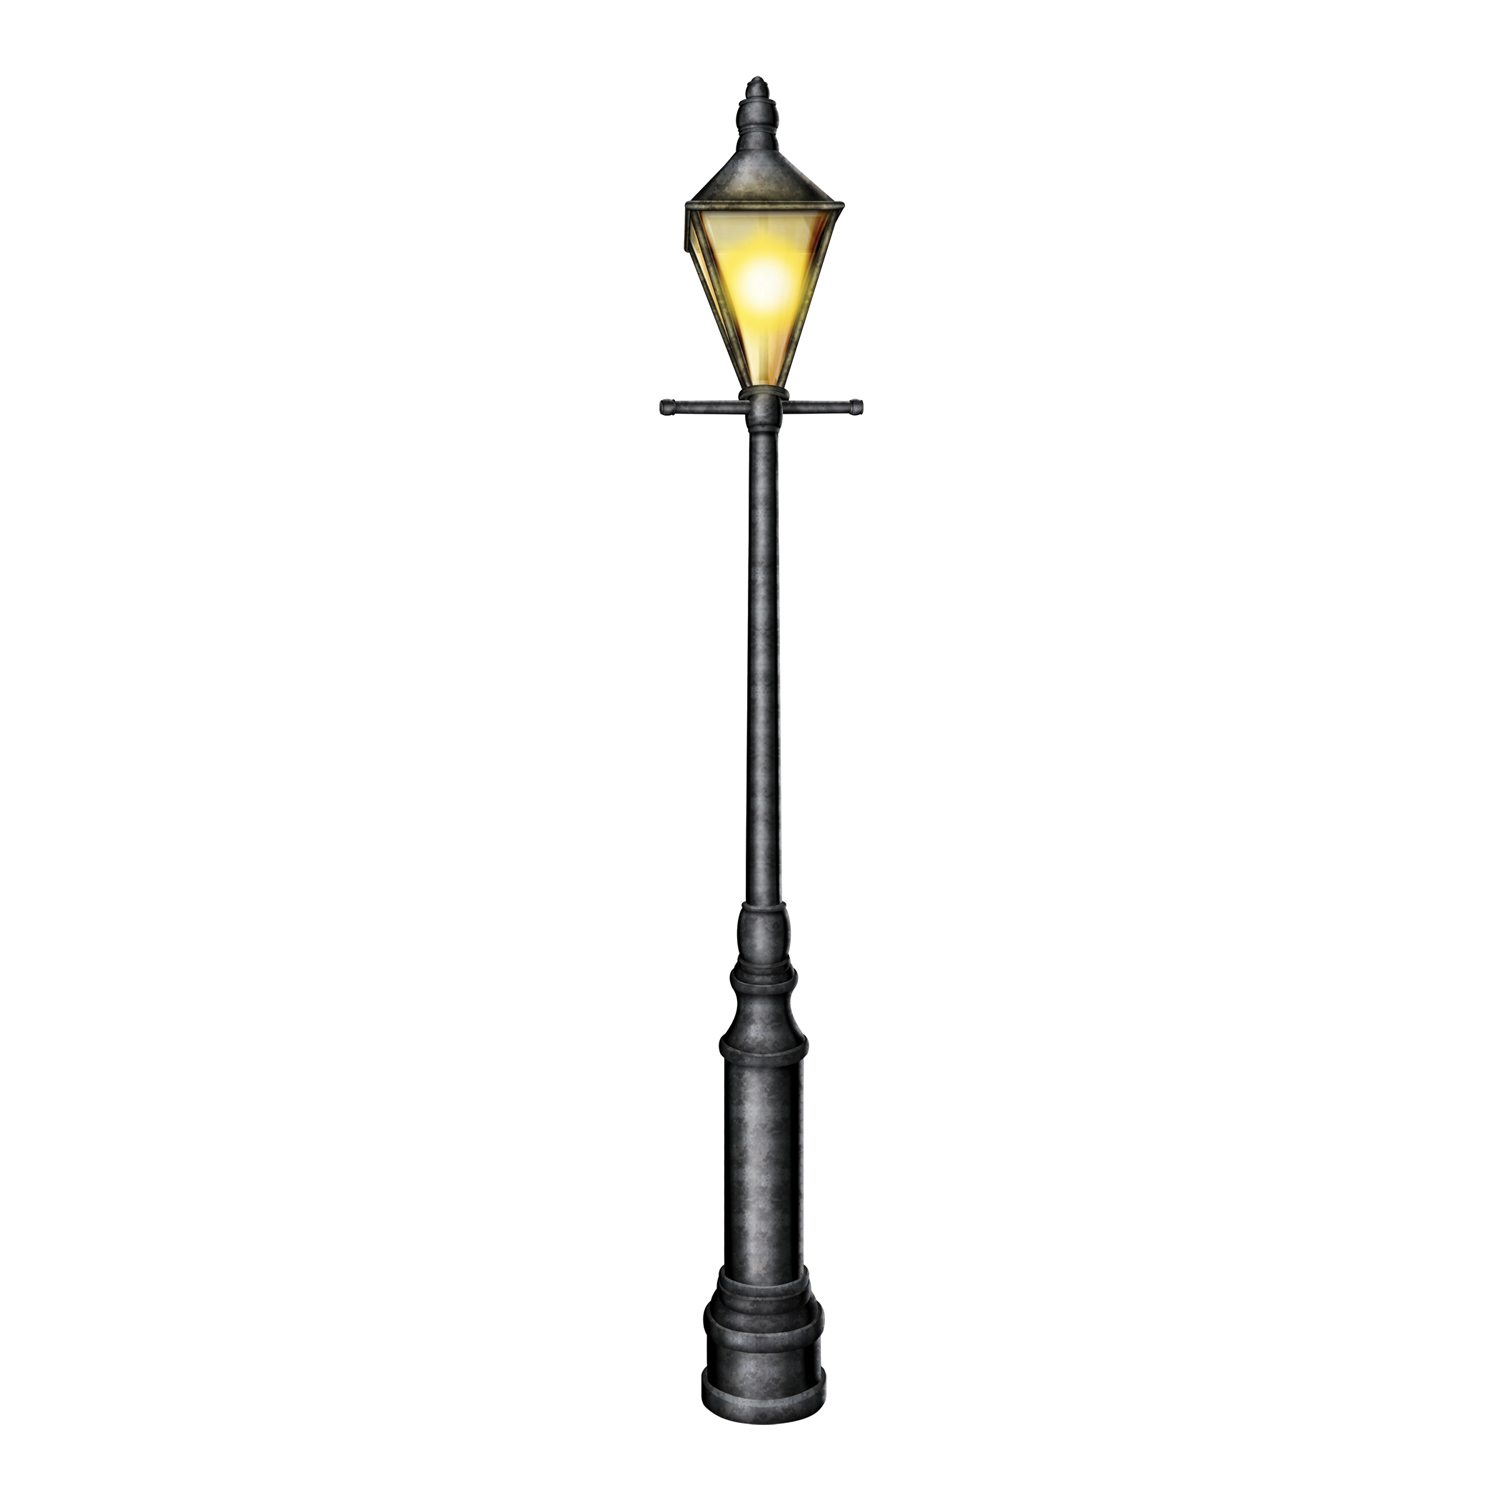 12 Wholesale Jointed Lamppost